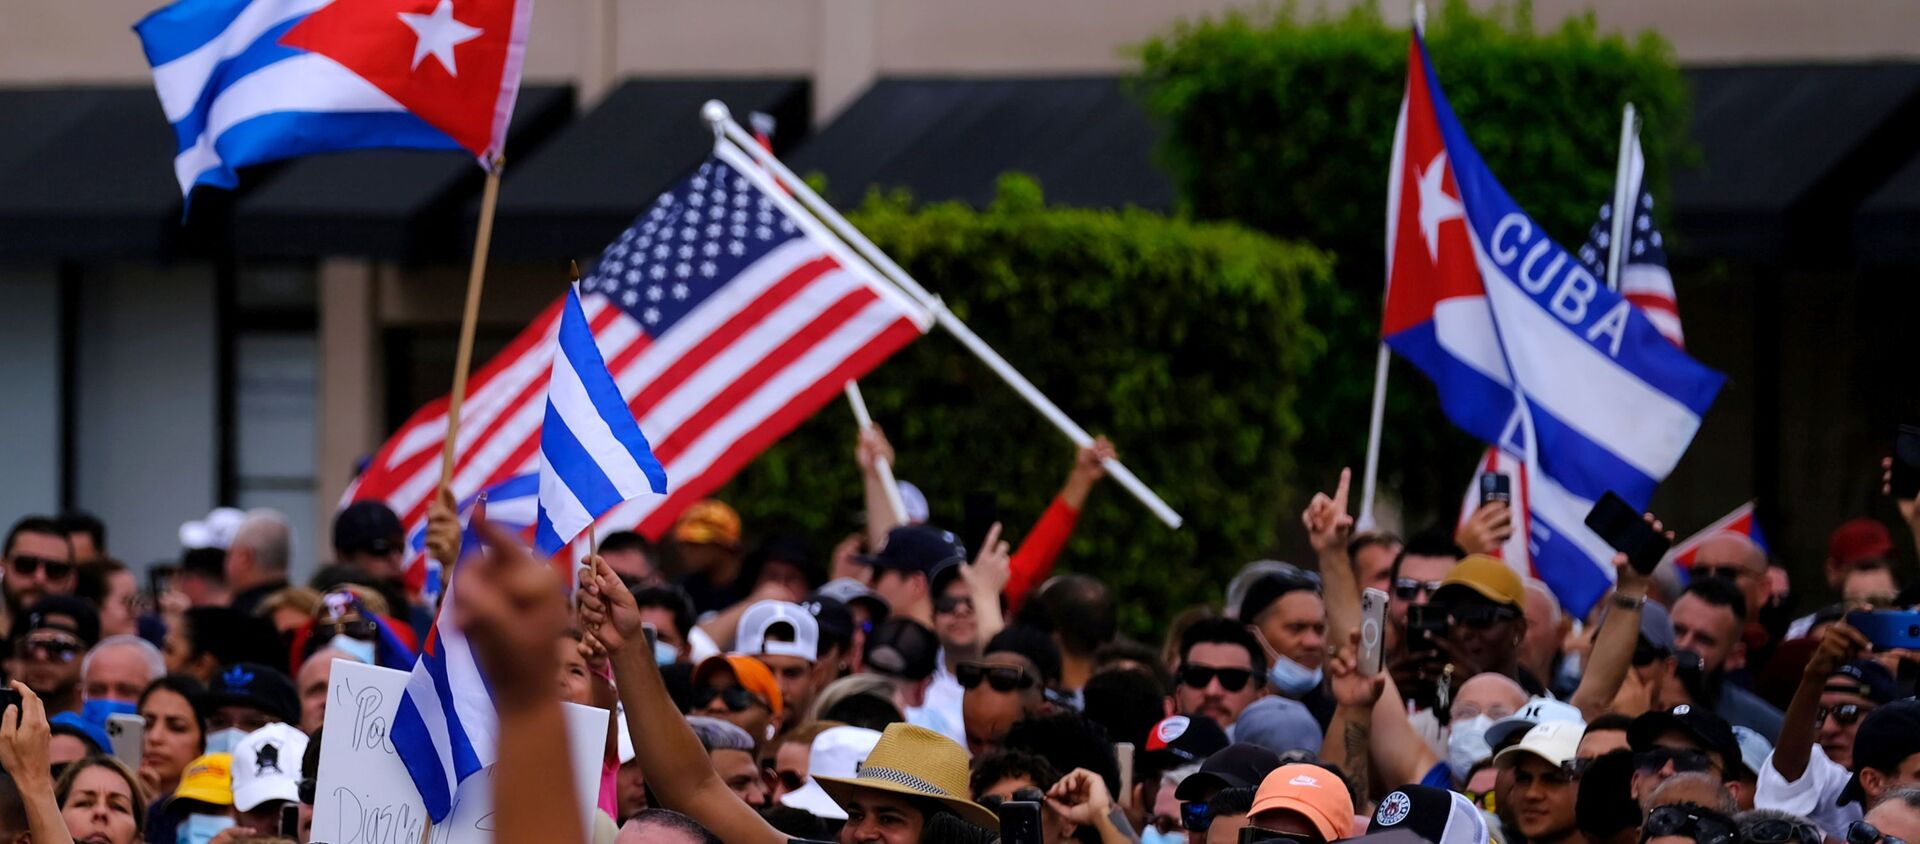 Emigres in Little Havana wave American and Cuban flags as they react to reports of protests in Cuba against the deteriorating economy, in Miami, Florida, U.S., July 11, 2021 - Sputnik International, 1920, 12.07.2021